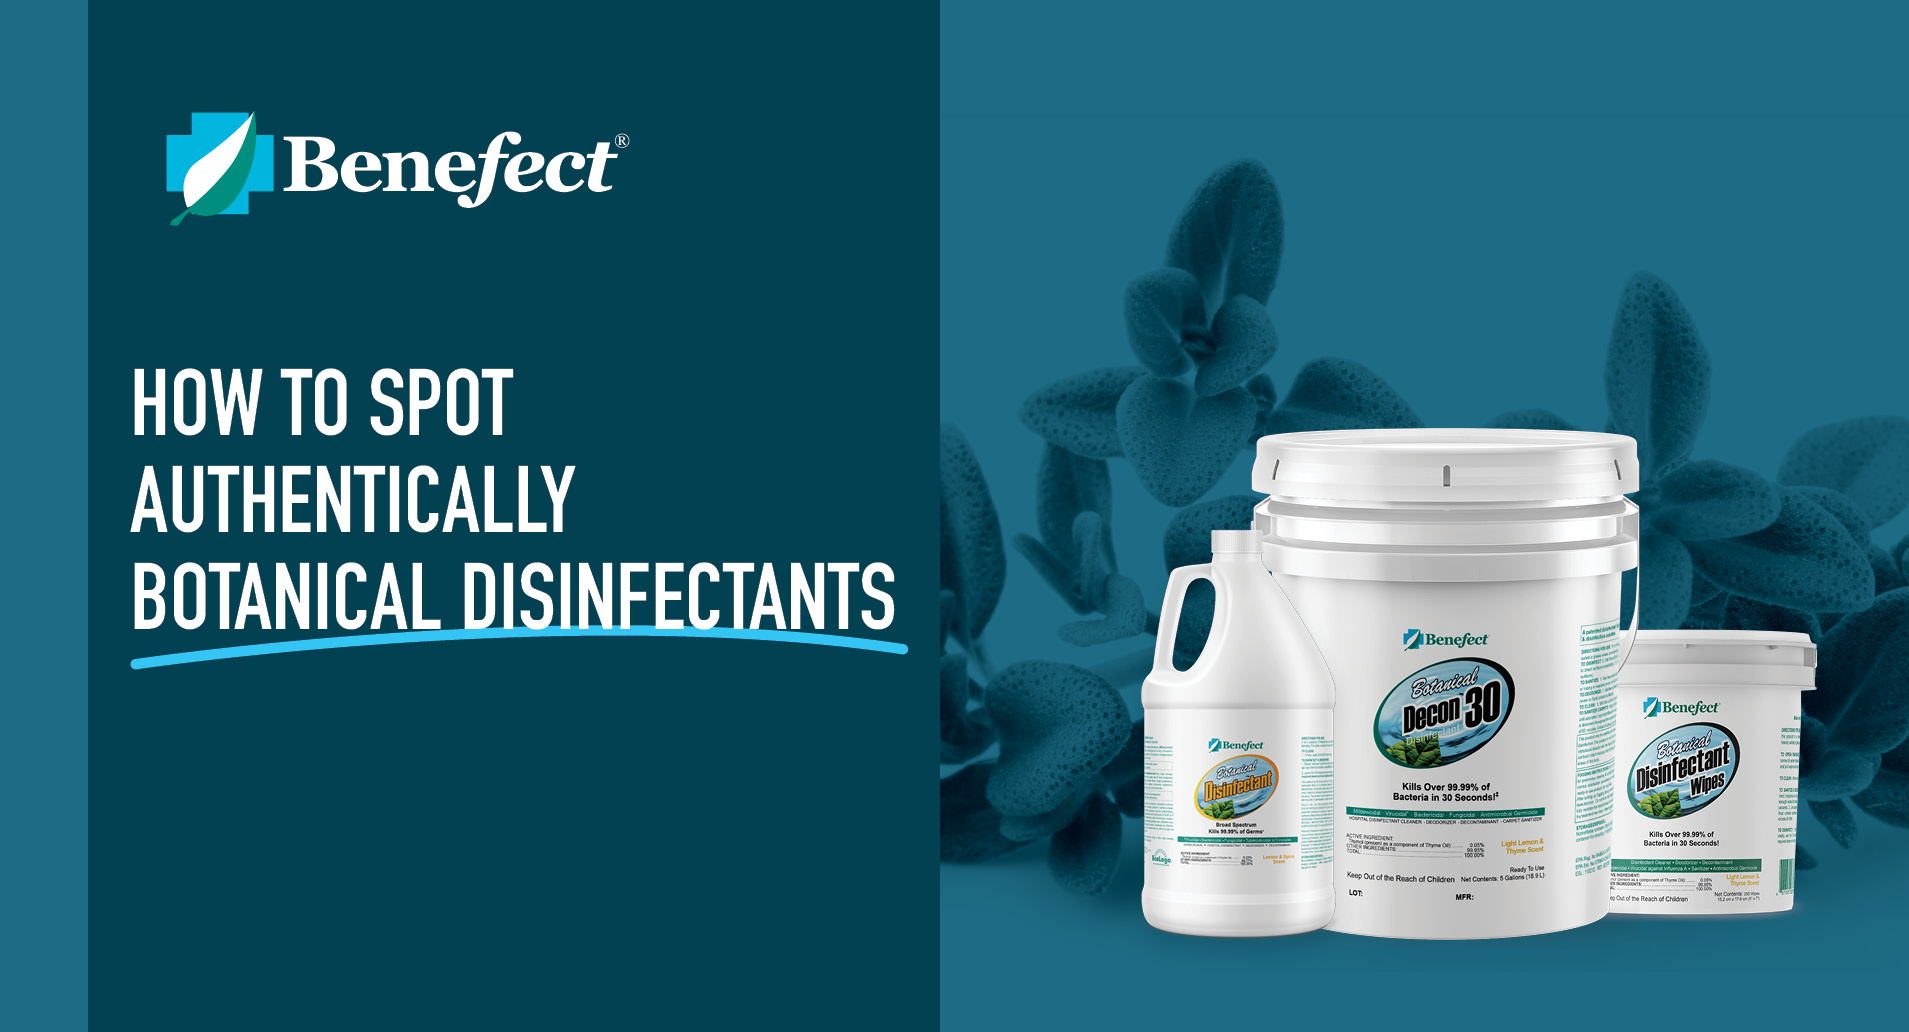 How to spot authentically botanical disinfectants